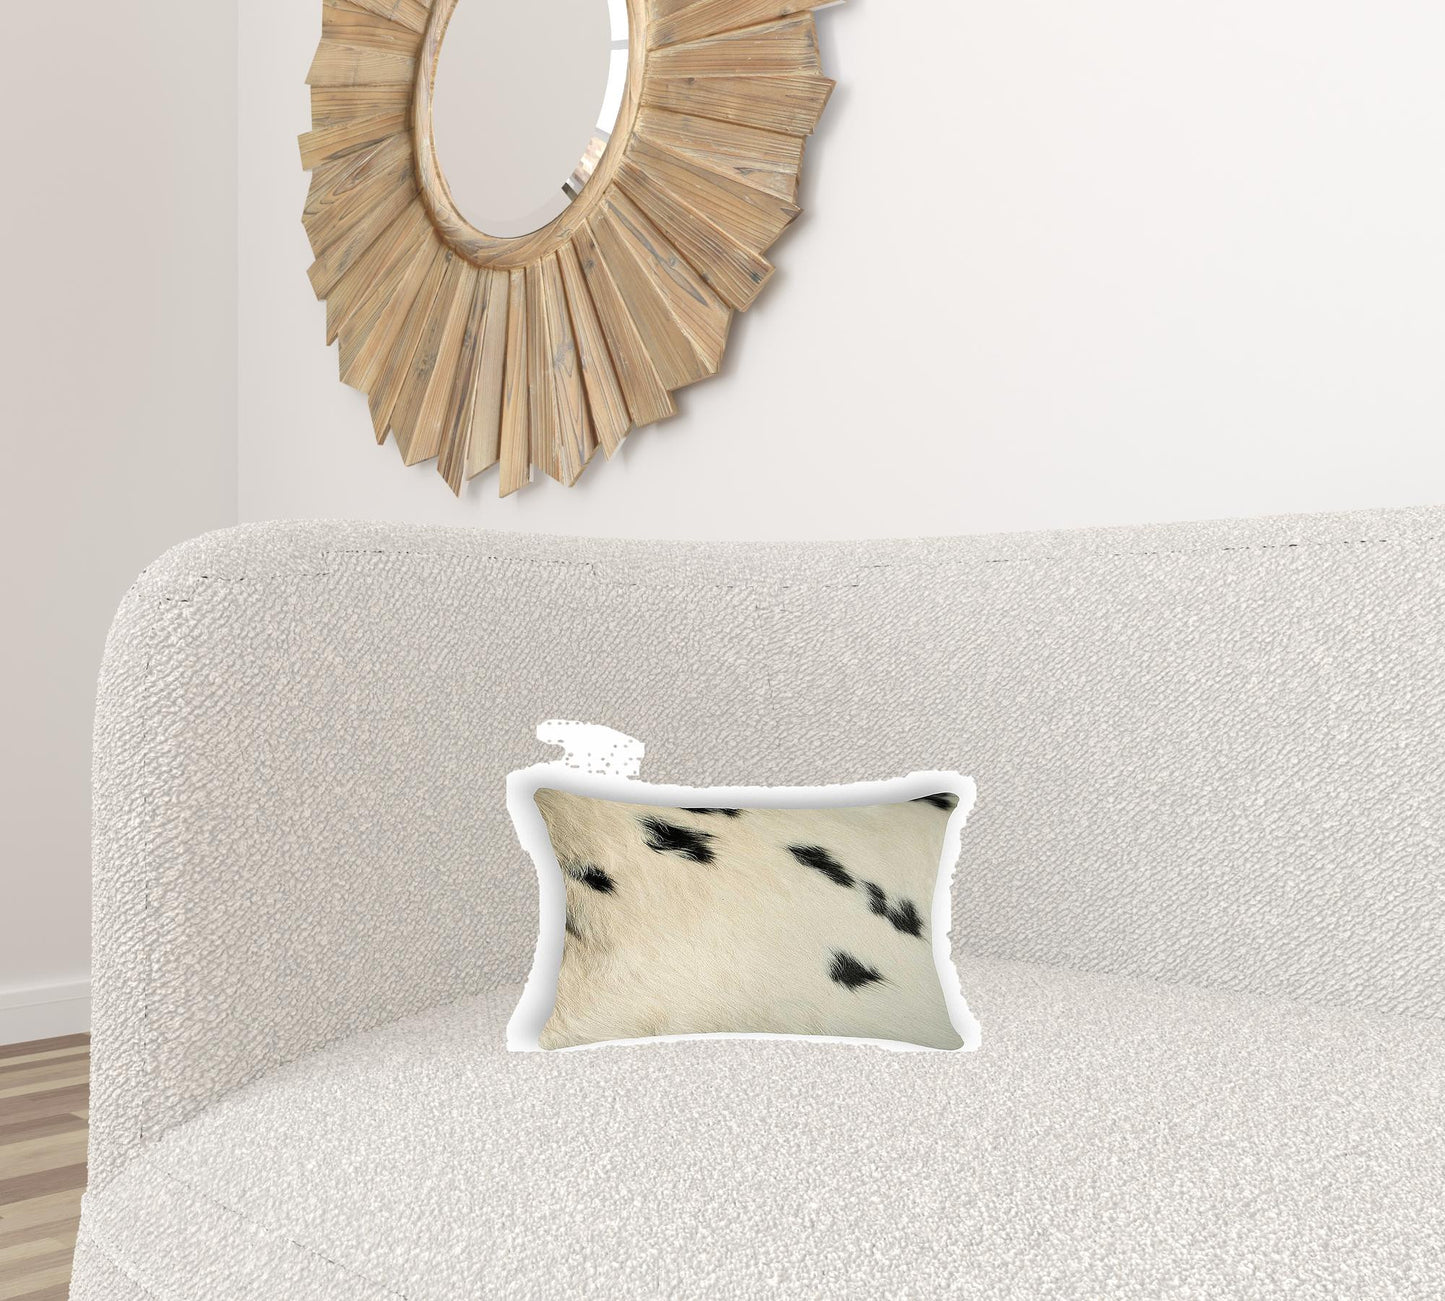 12" X 20" X 5" White And Black Cowhide  Pillow